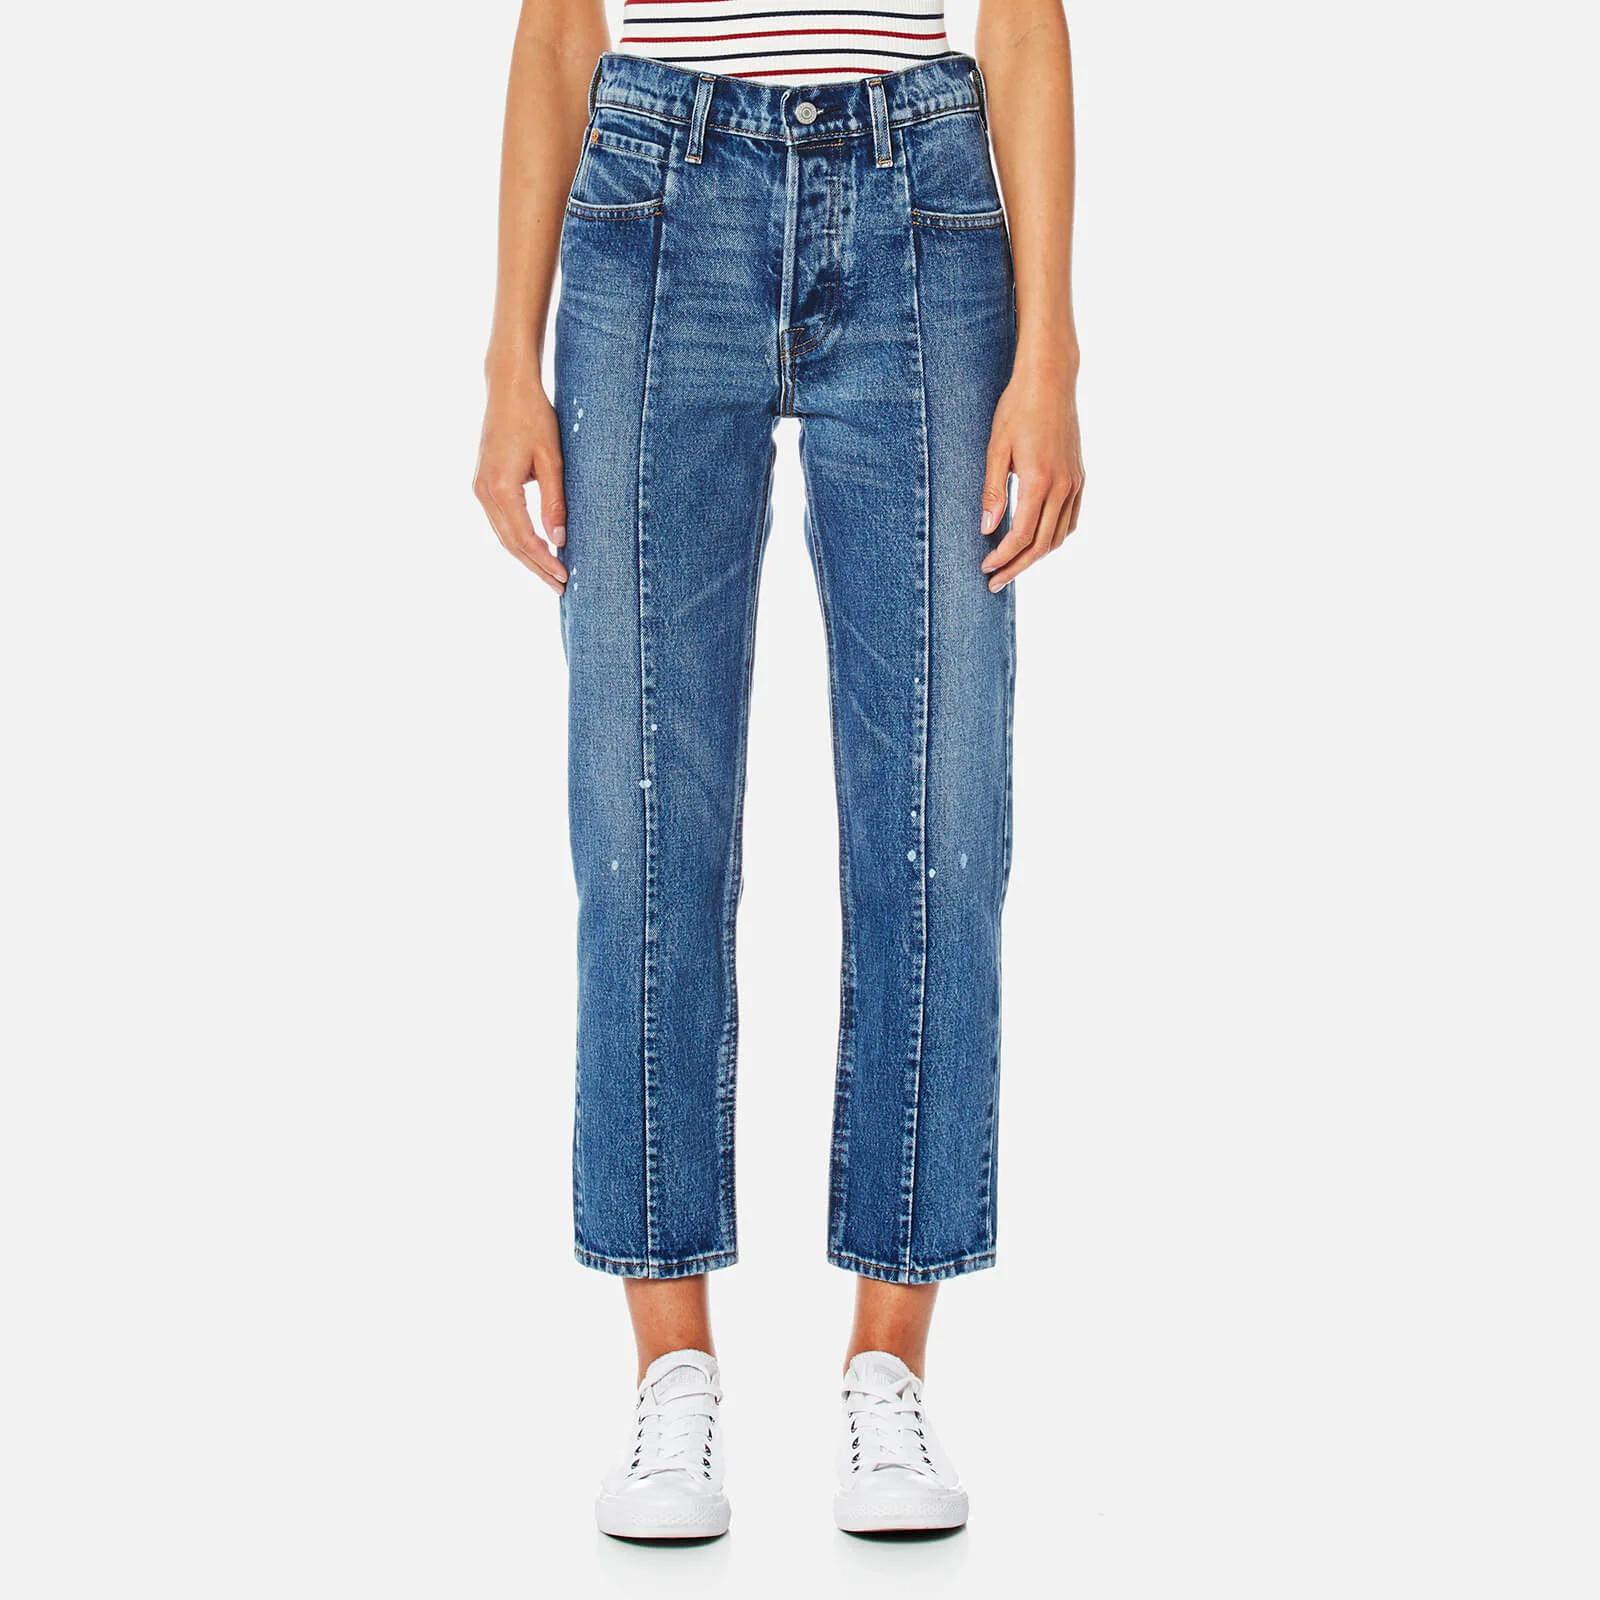 Levi's Women's Altered Straight Jeans - No Limits Image 1